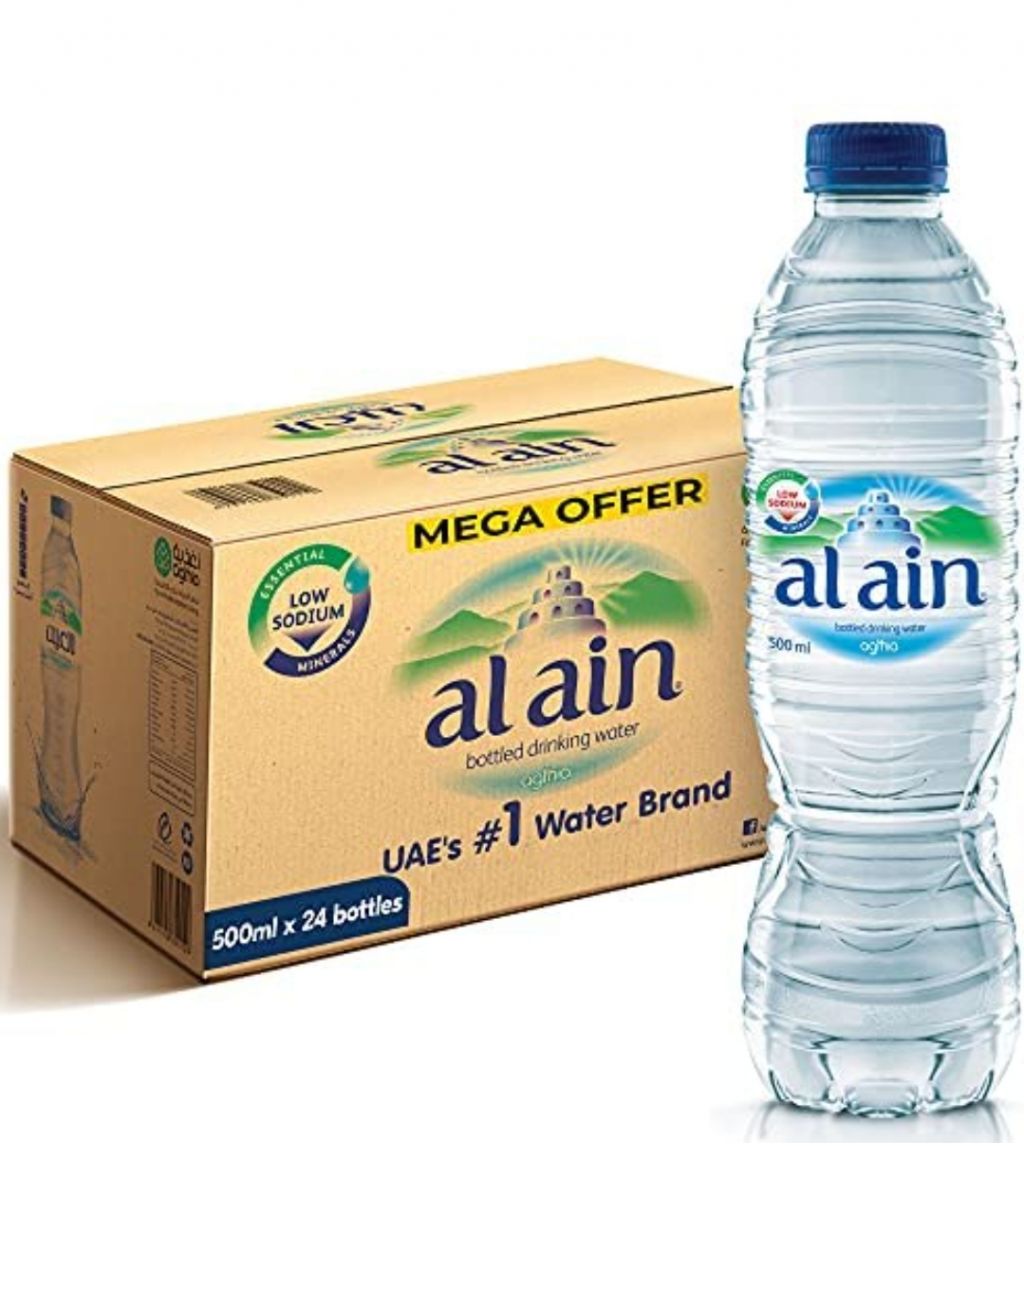 Beverages Promotions offer - in Dubai #1064 - 1  image 